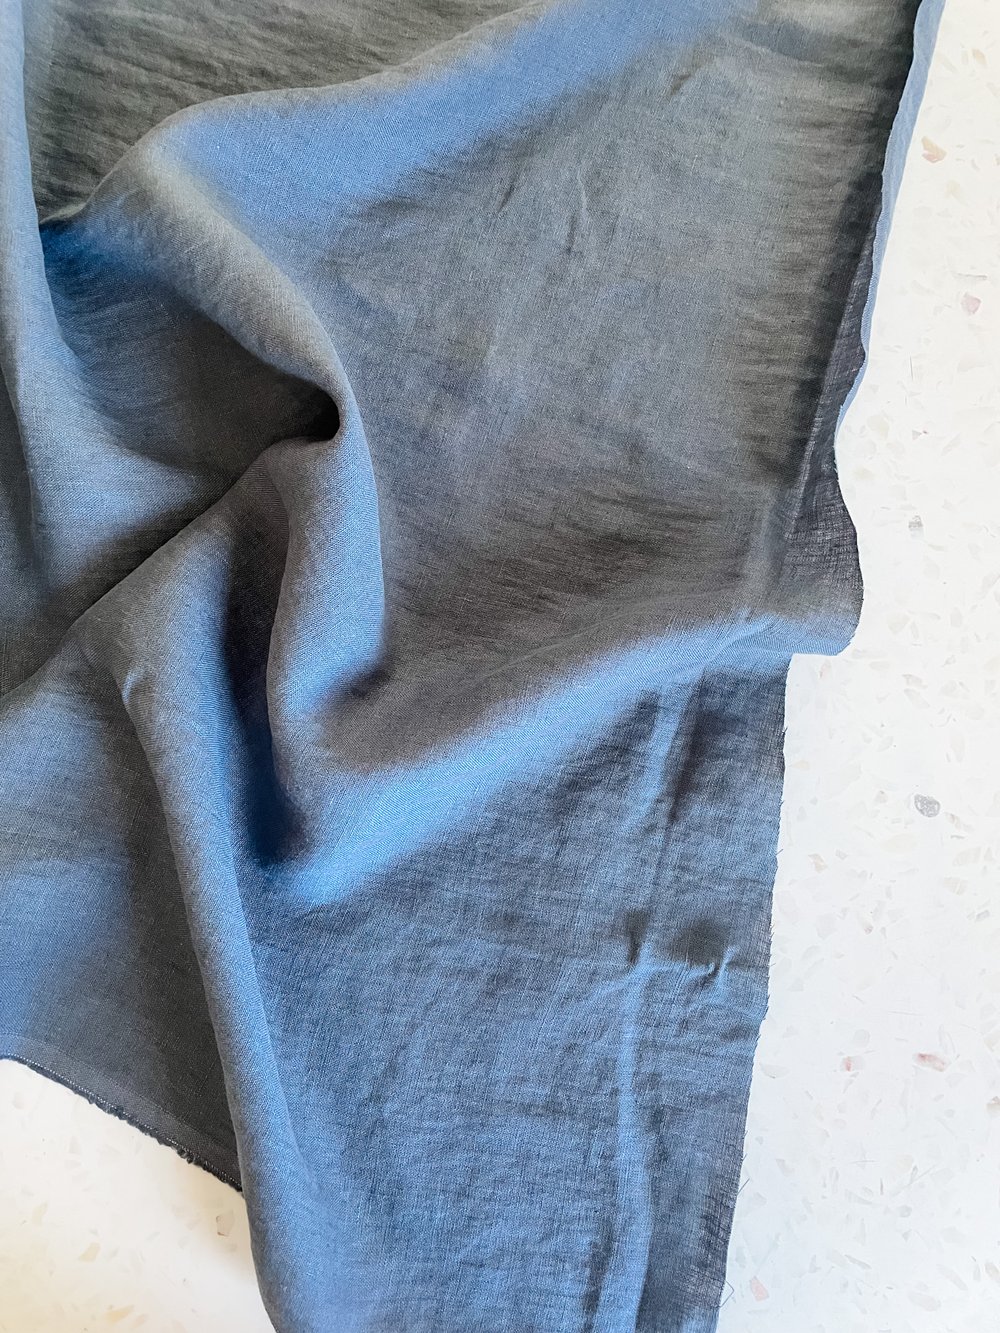 Fabric, Notions, Threads & More — Material Goods